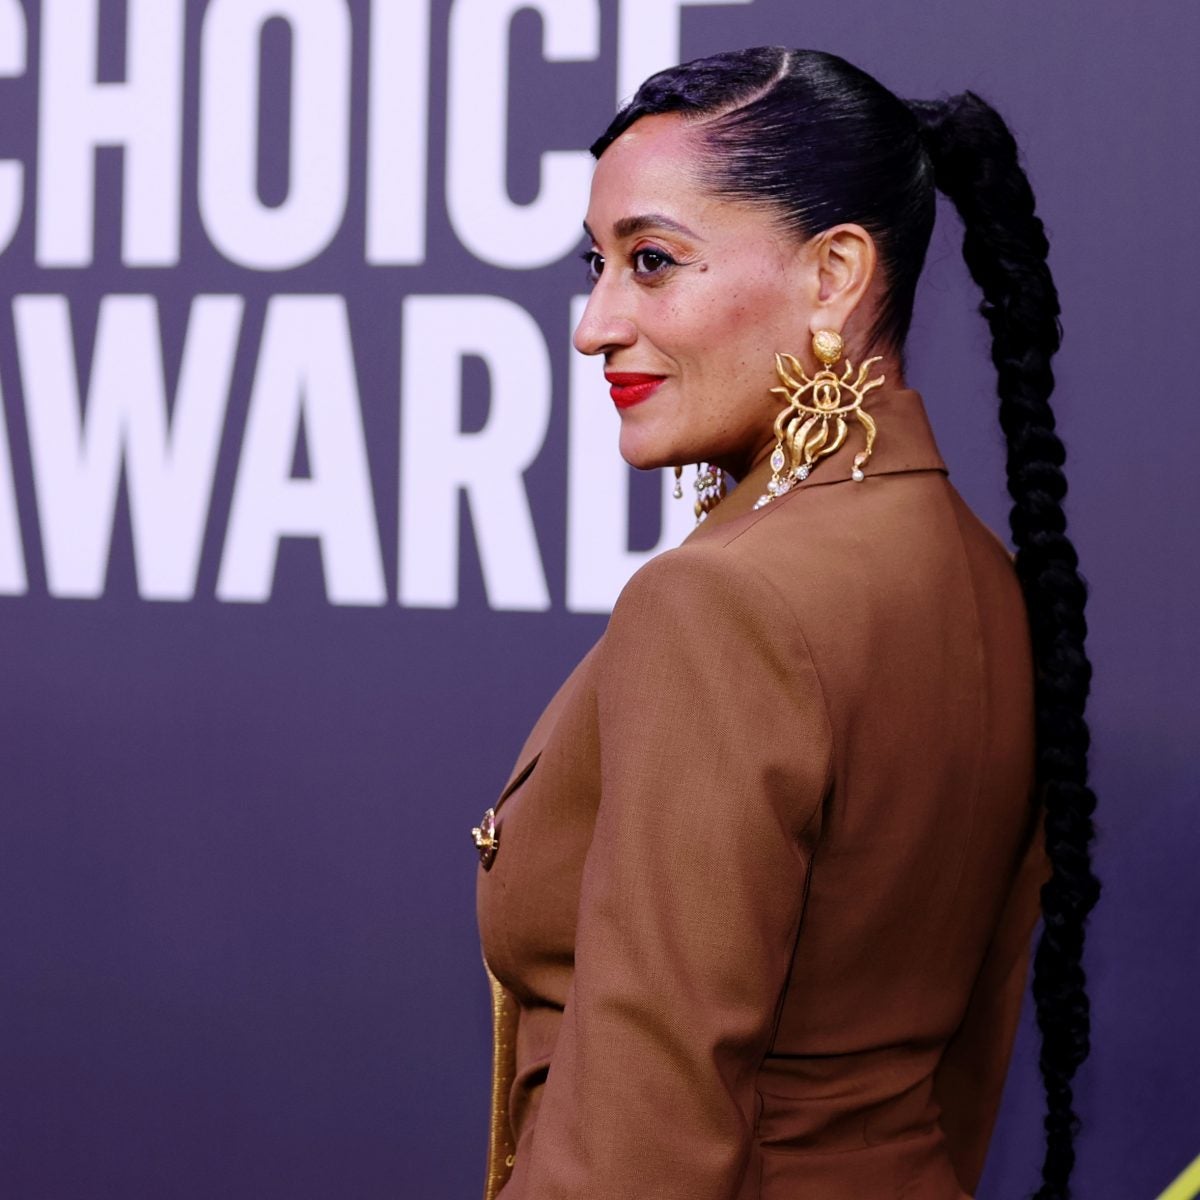 Tracee Ellis Ross’s Signature Braid Got An Old School Upgrade For The 2020 E! People’s Choice Awards